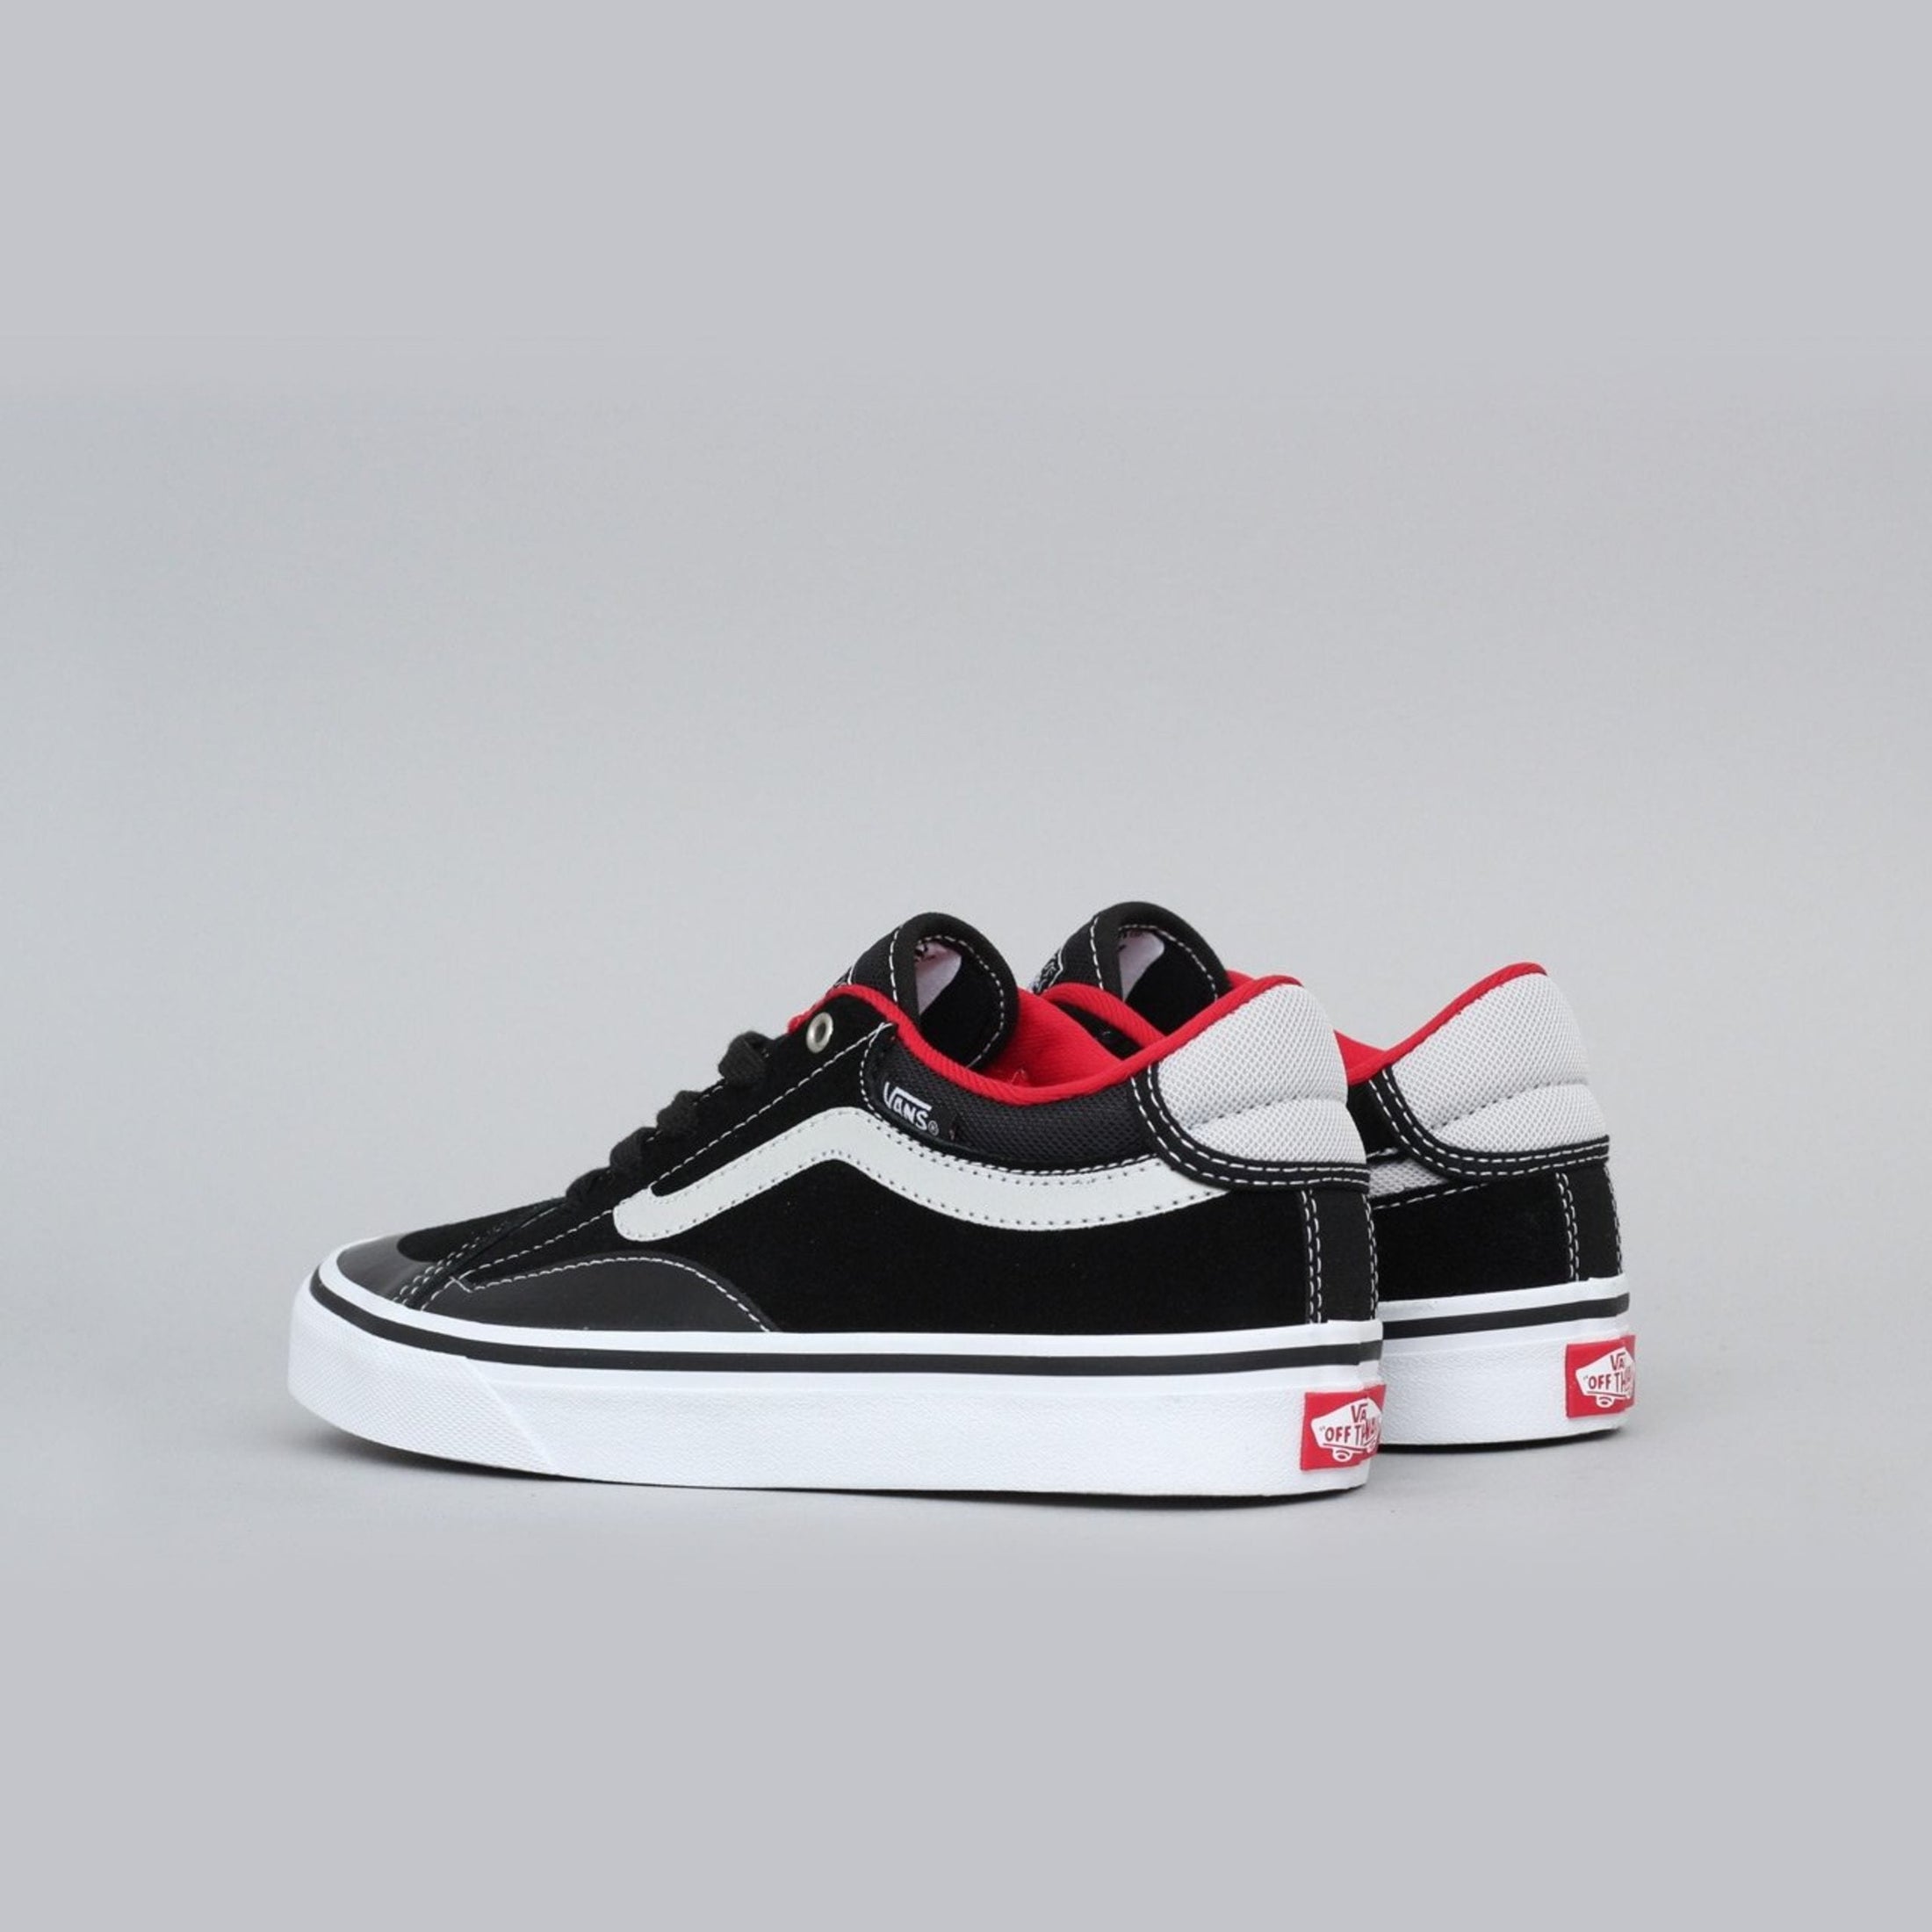 Vans TNT Advanced Prototype Youth Shoes Black / White / Red